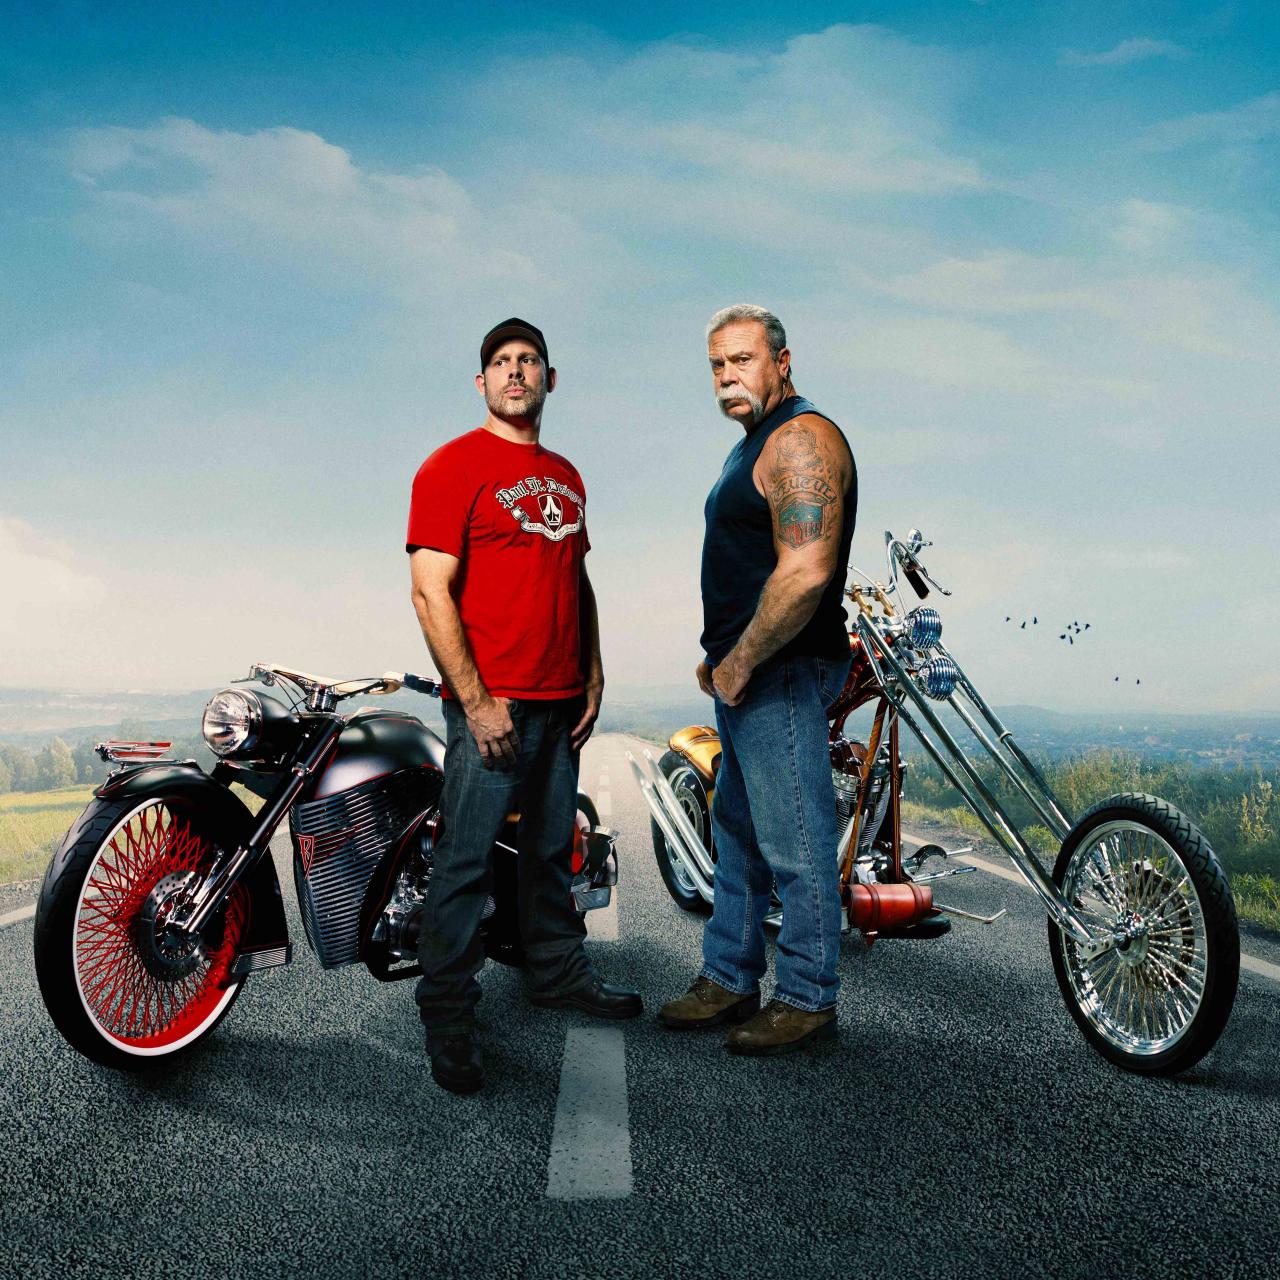 TuneUp Your Engines, American Chopper Returns with a 2 hour special on